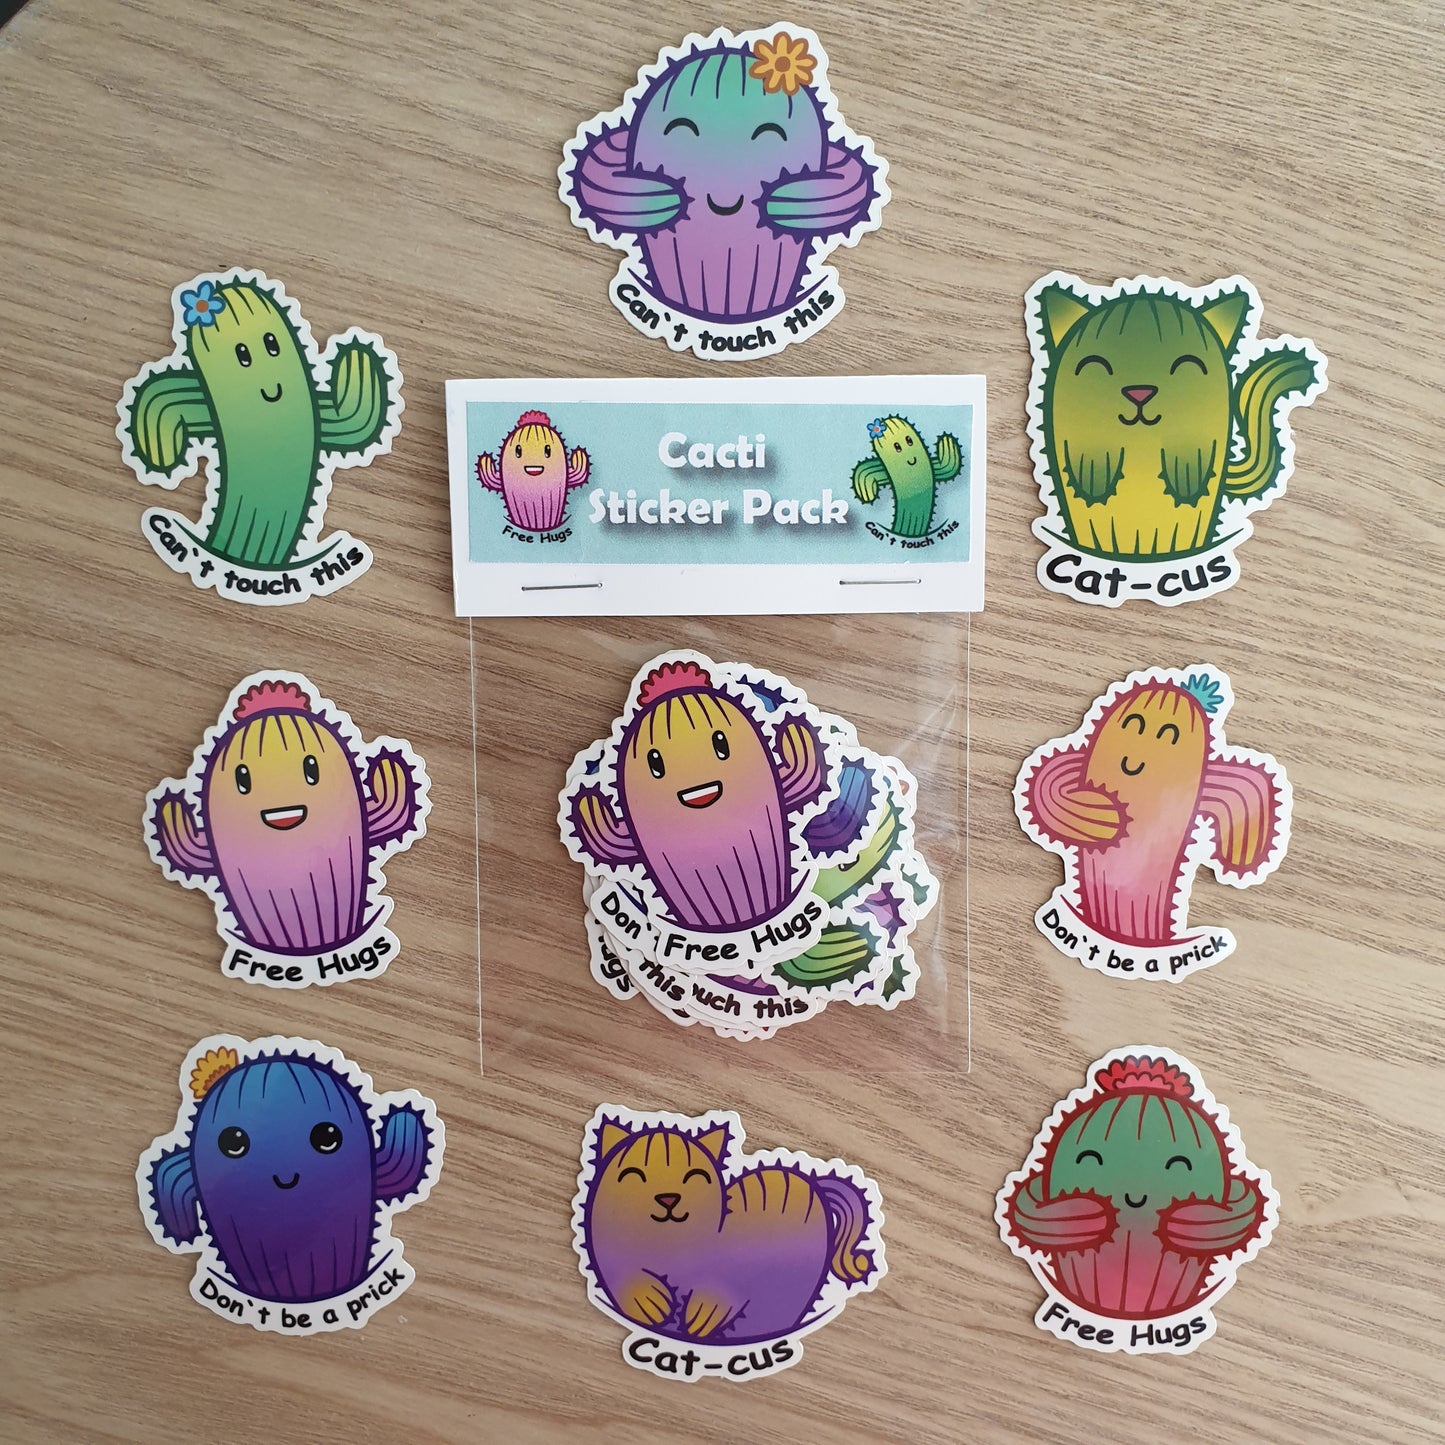 Cactus Sticker - "Can't touch this" - green and yellow